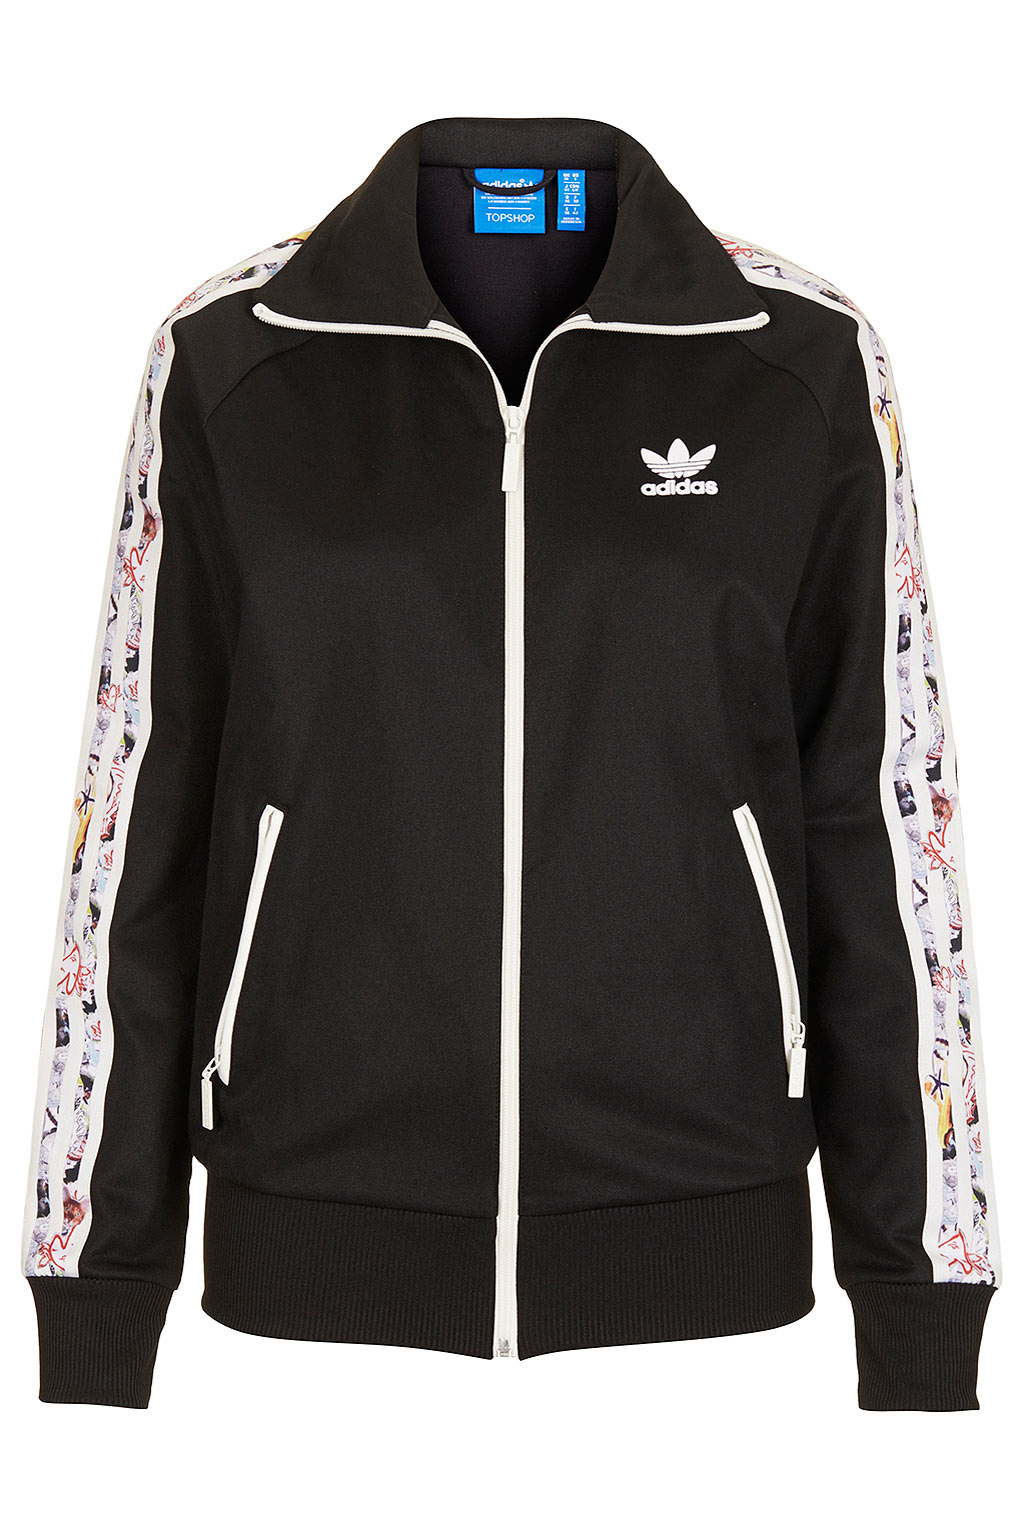 Lyst TOPSHOP Tracksuit  Top By X Adidas  Originals  in Black